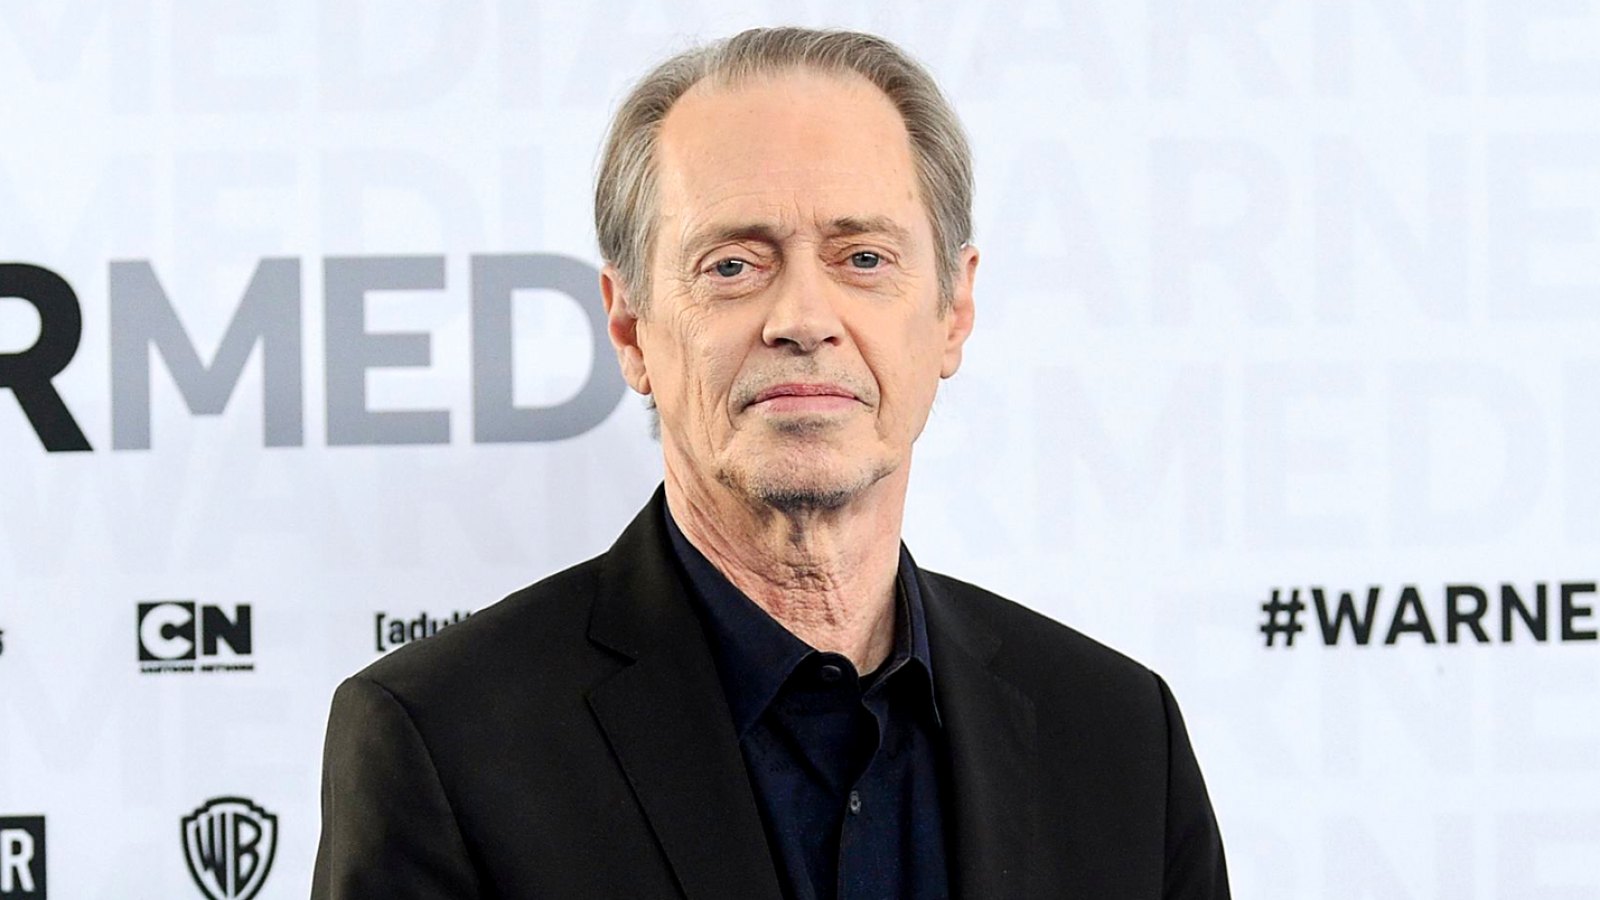 Steve Buscemi Recalls Volunteering in 9/11 Missing Person Search: ‘It’s Still With Me’